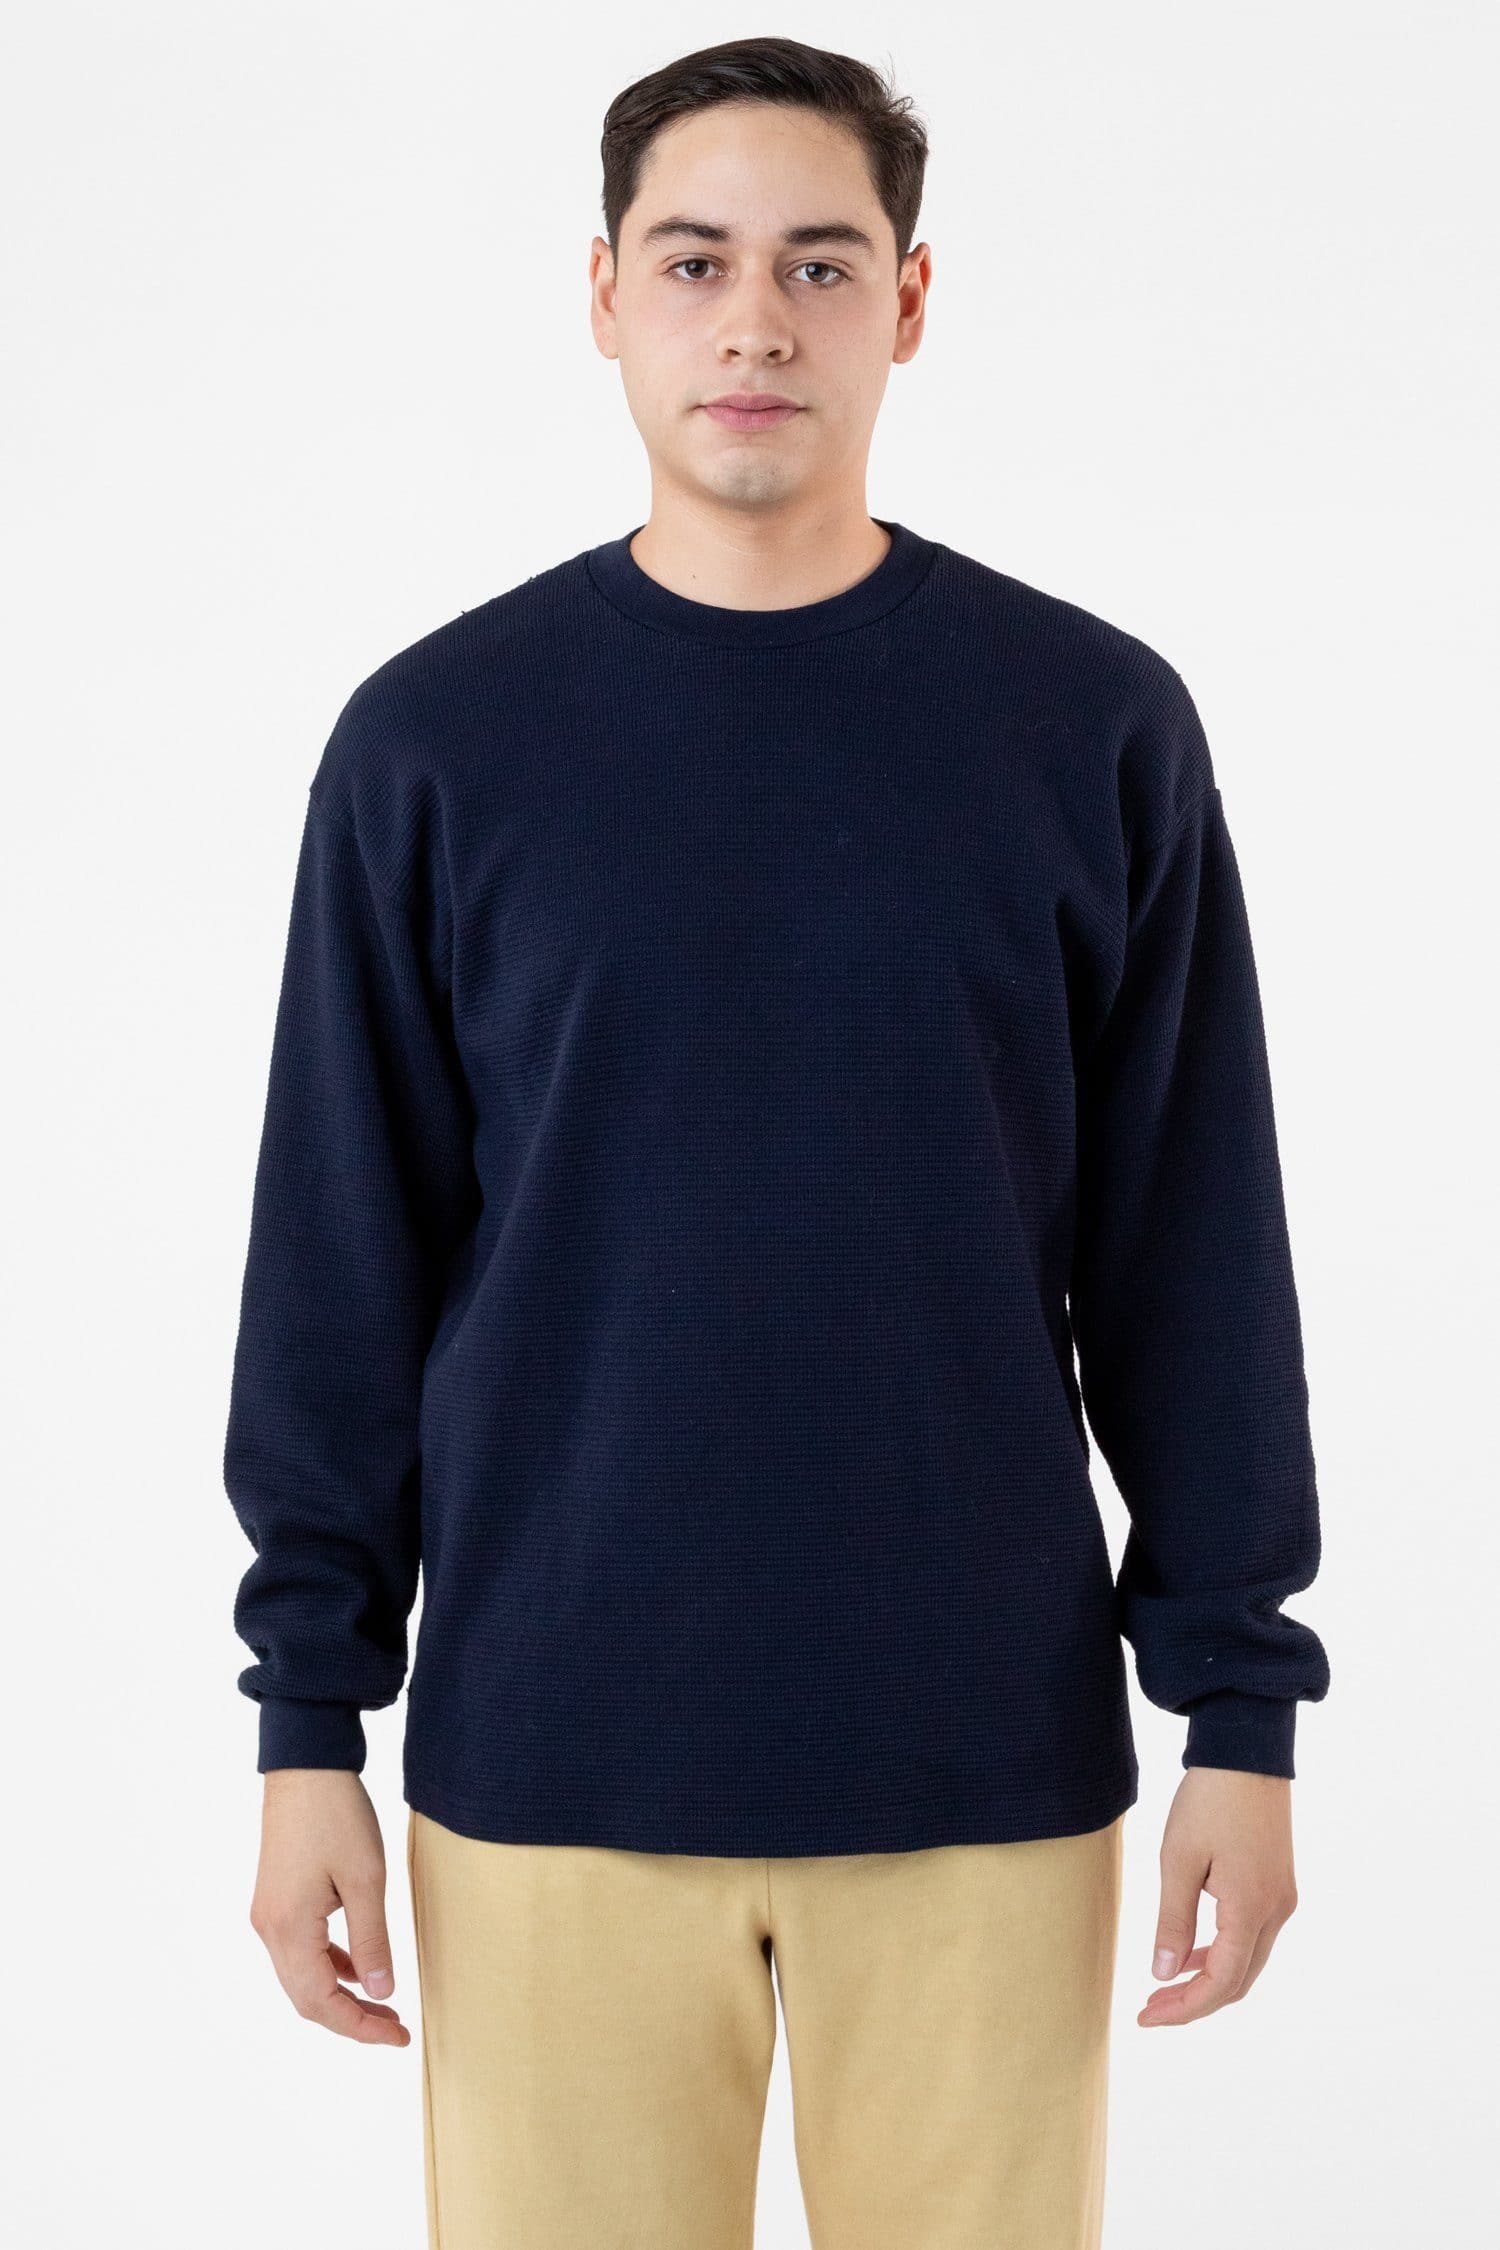 Cotton Thermal Cuffed Long Sleeve Crew in Powder Blue